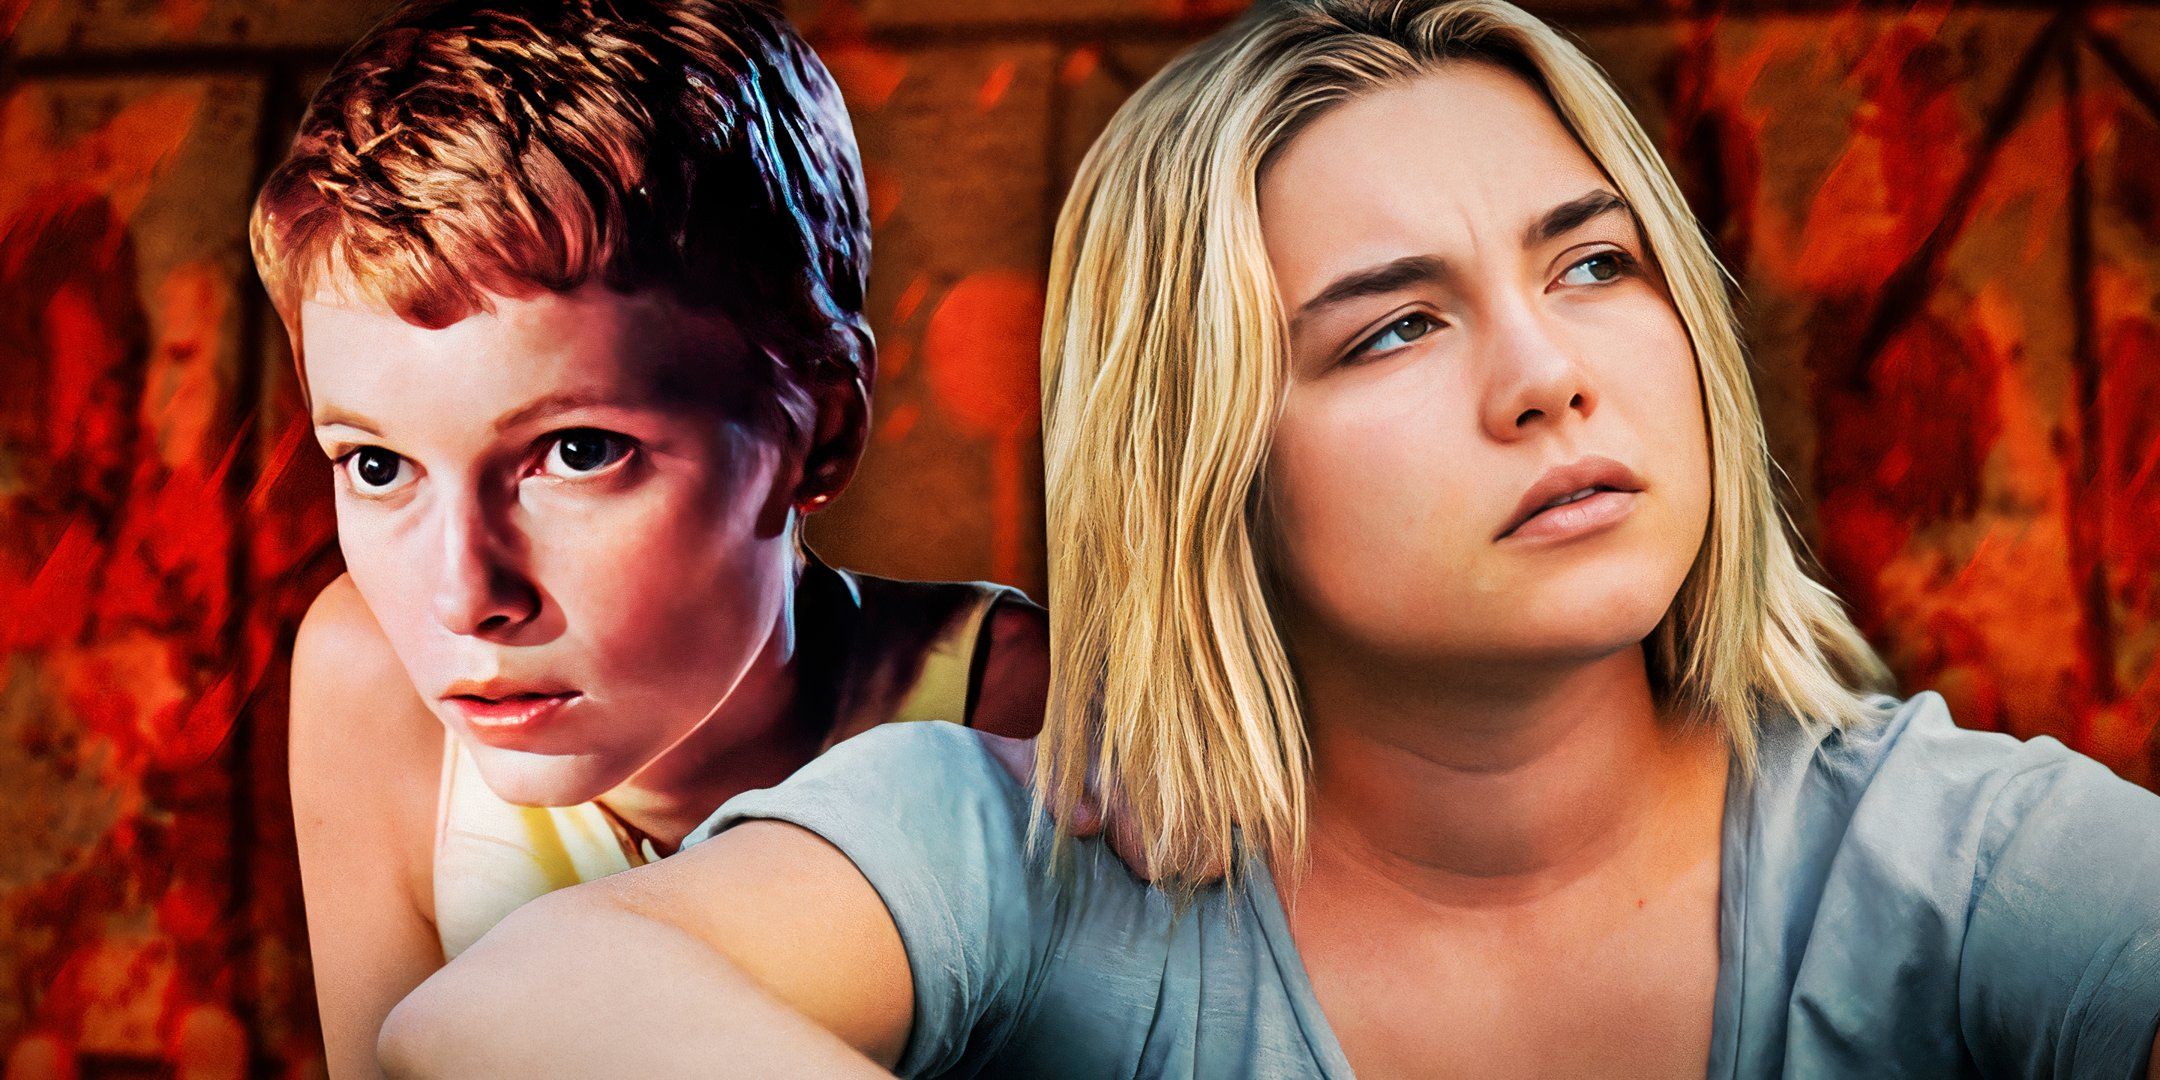 A custom image where Mia Farrow from Rosemary's Baby is next to Florence Pugh from Midsommar.